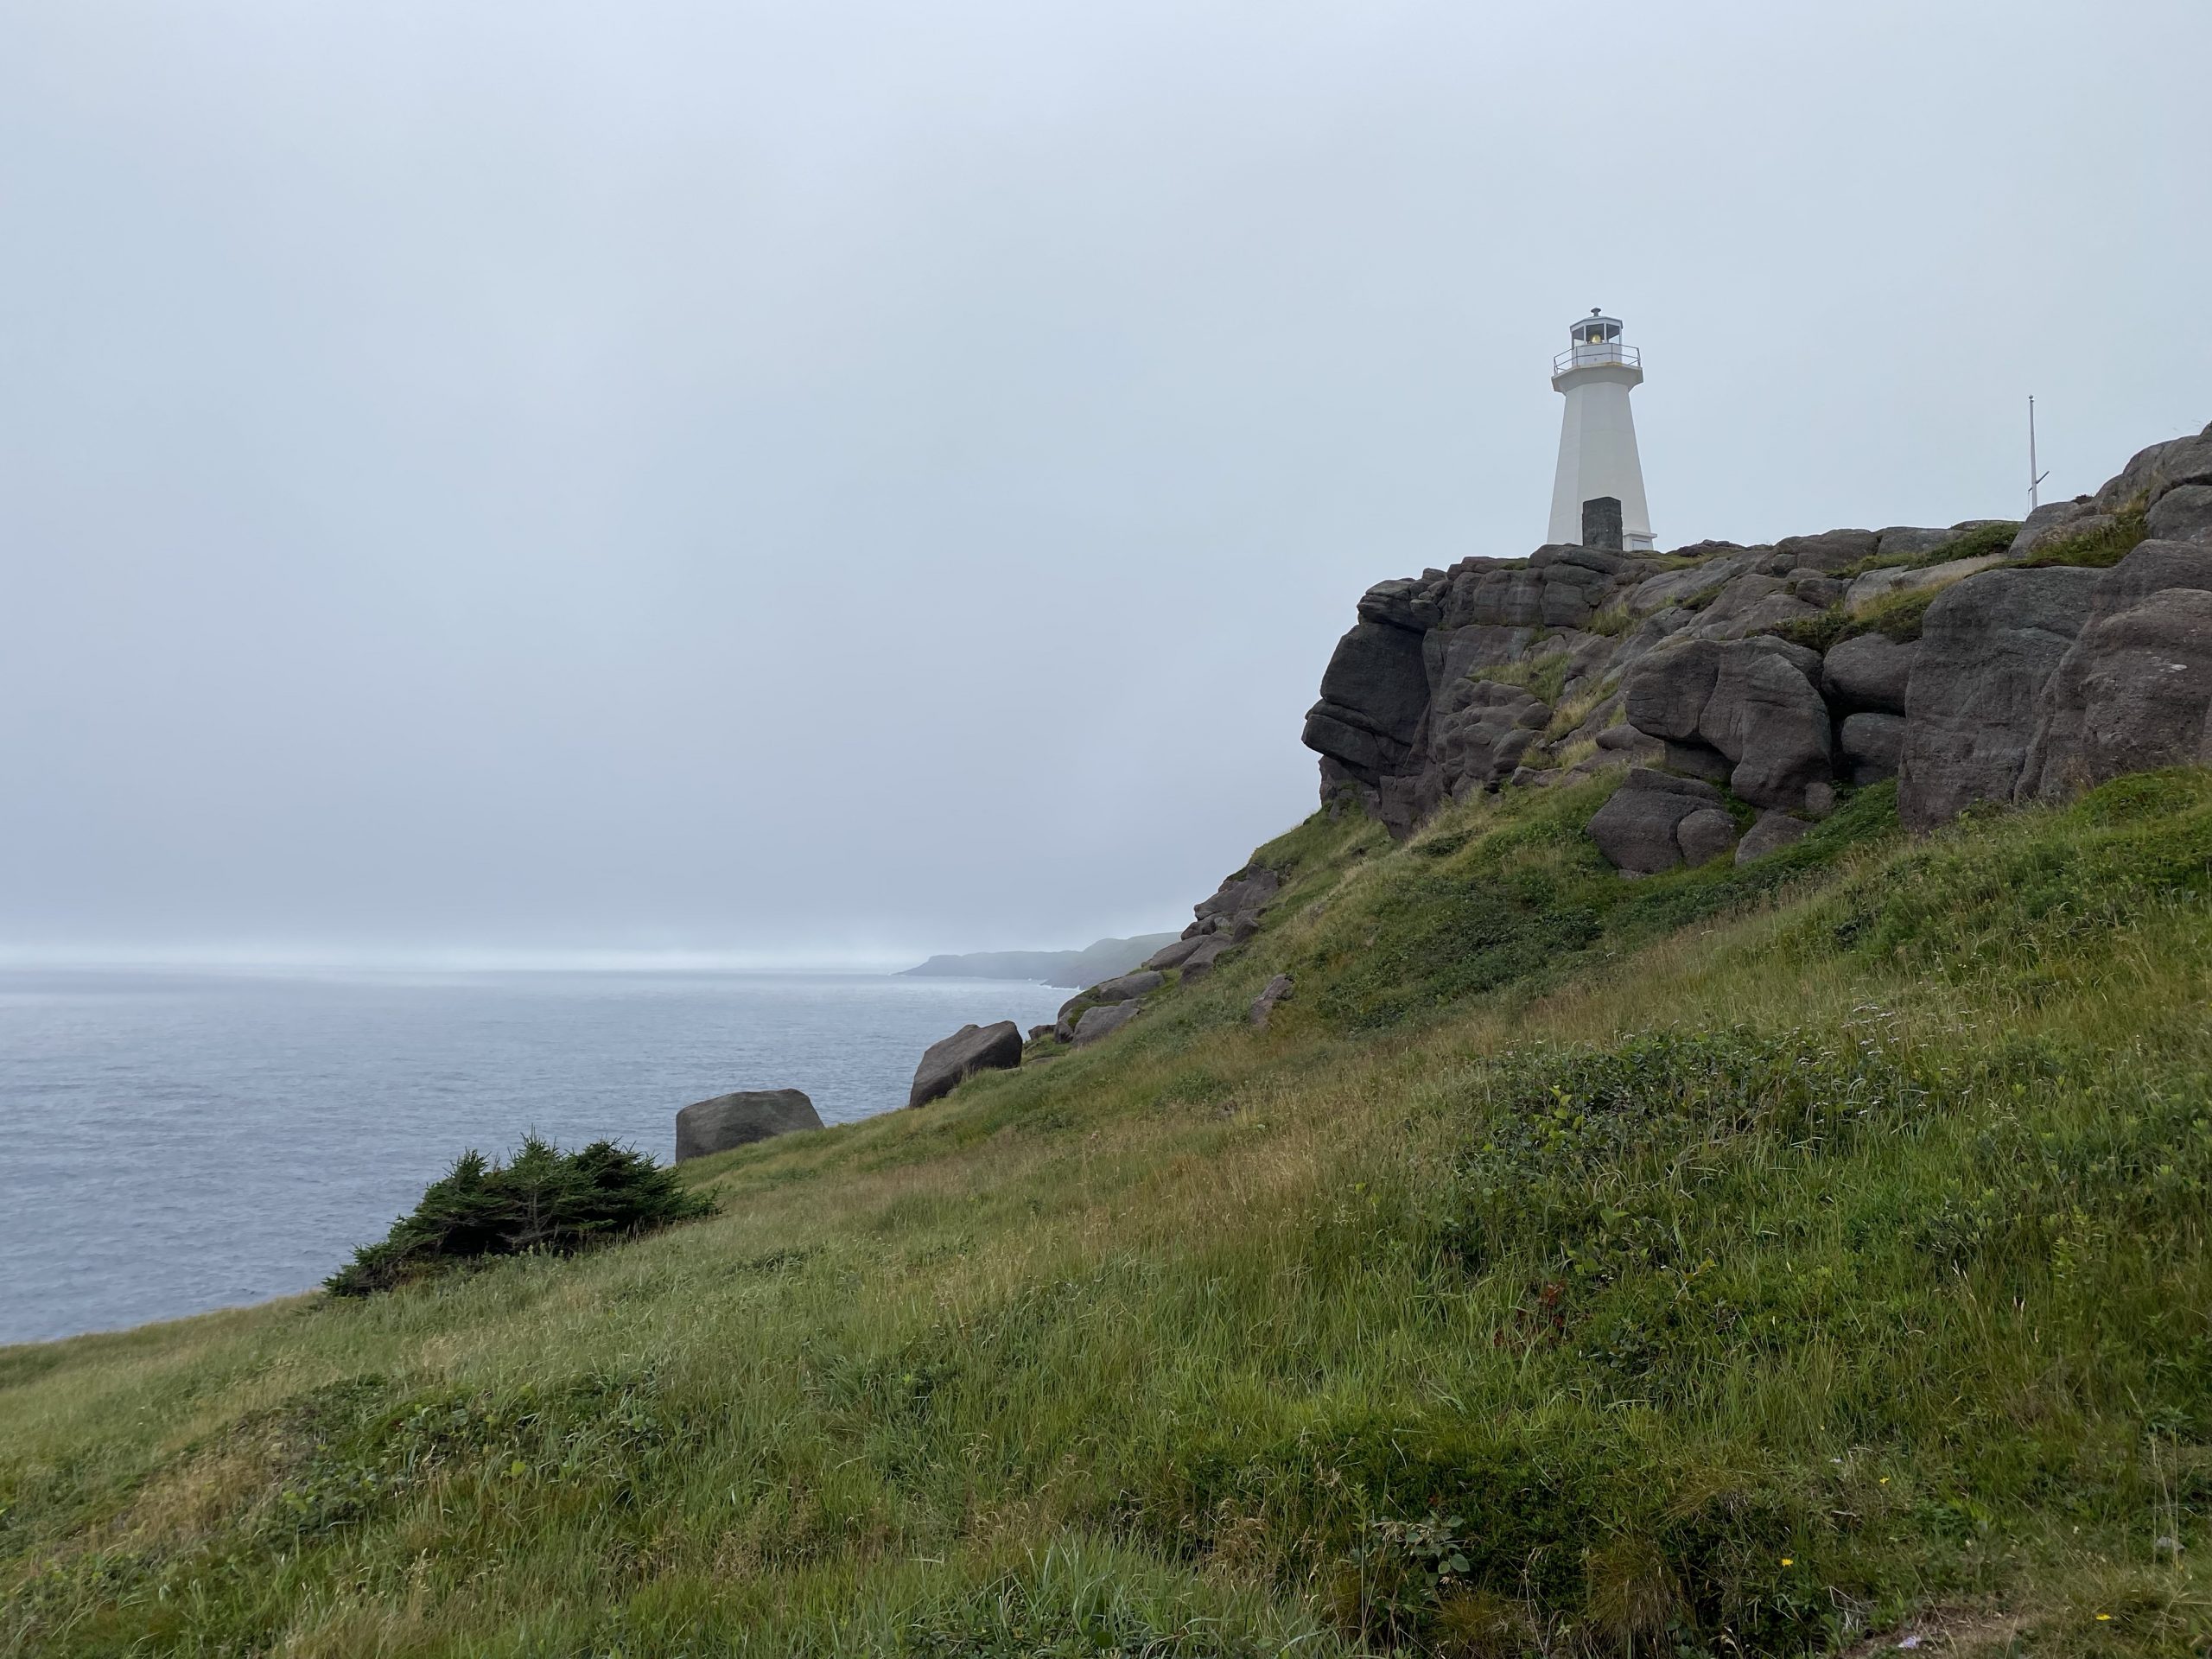 The Cape Spear lighthouse and coastline, looking south.